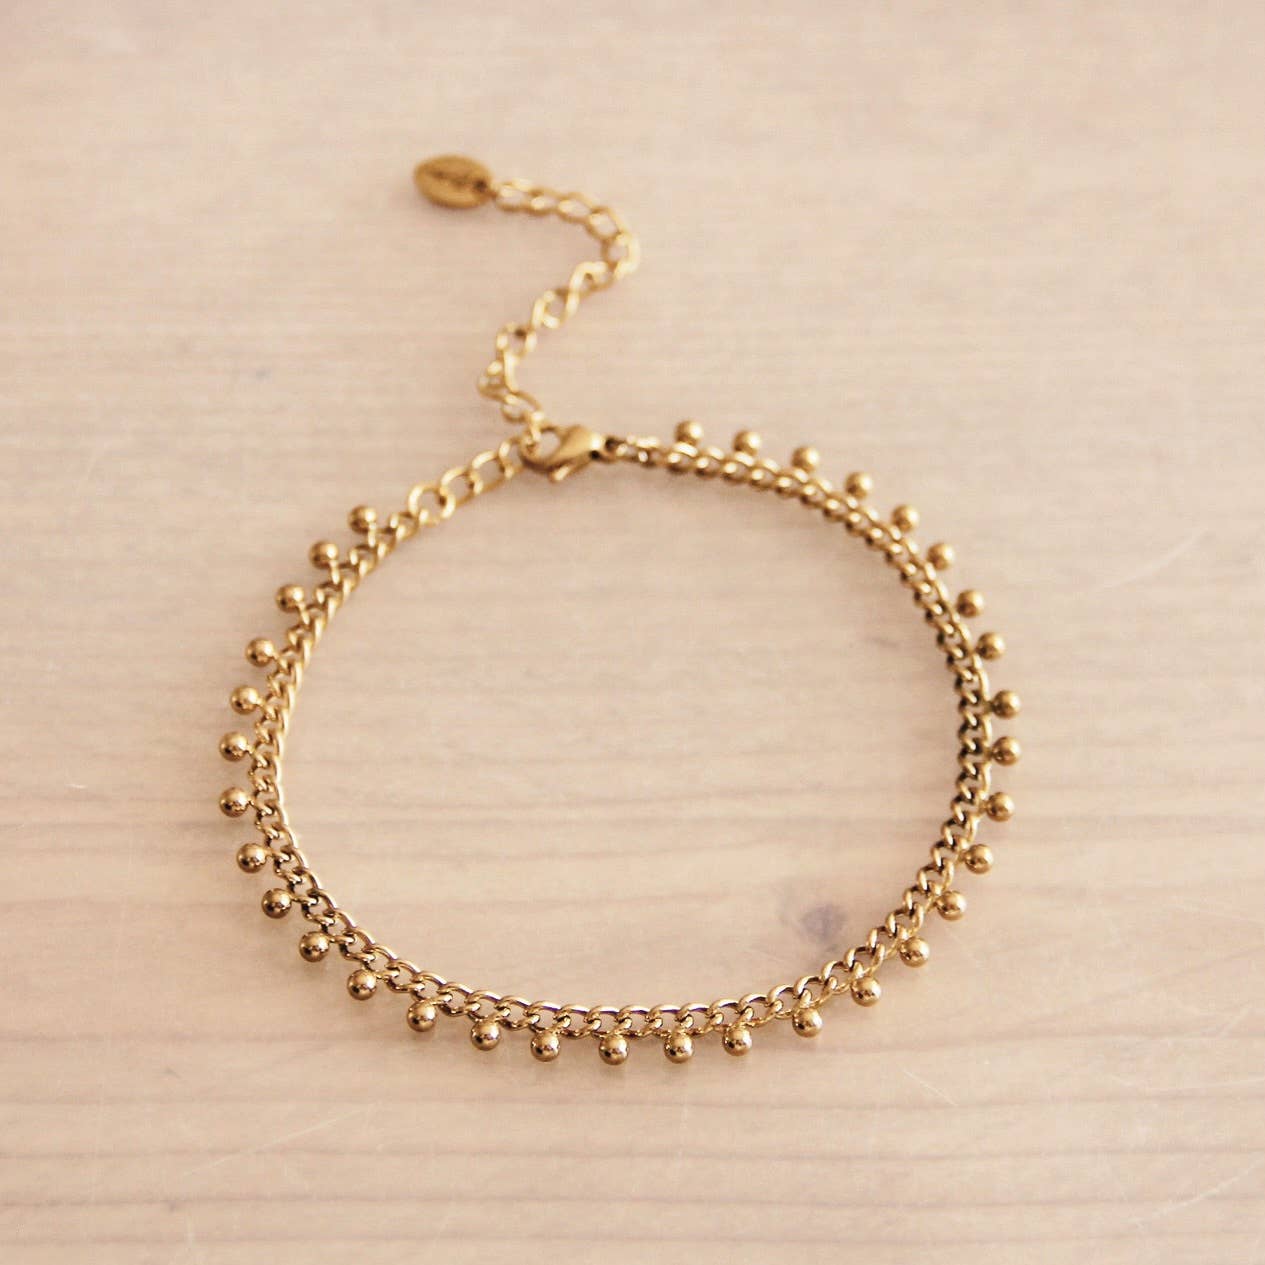 Steel chain bracelet with balls - gold